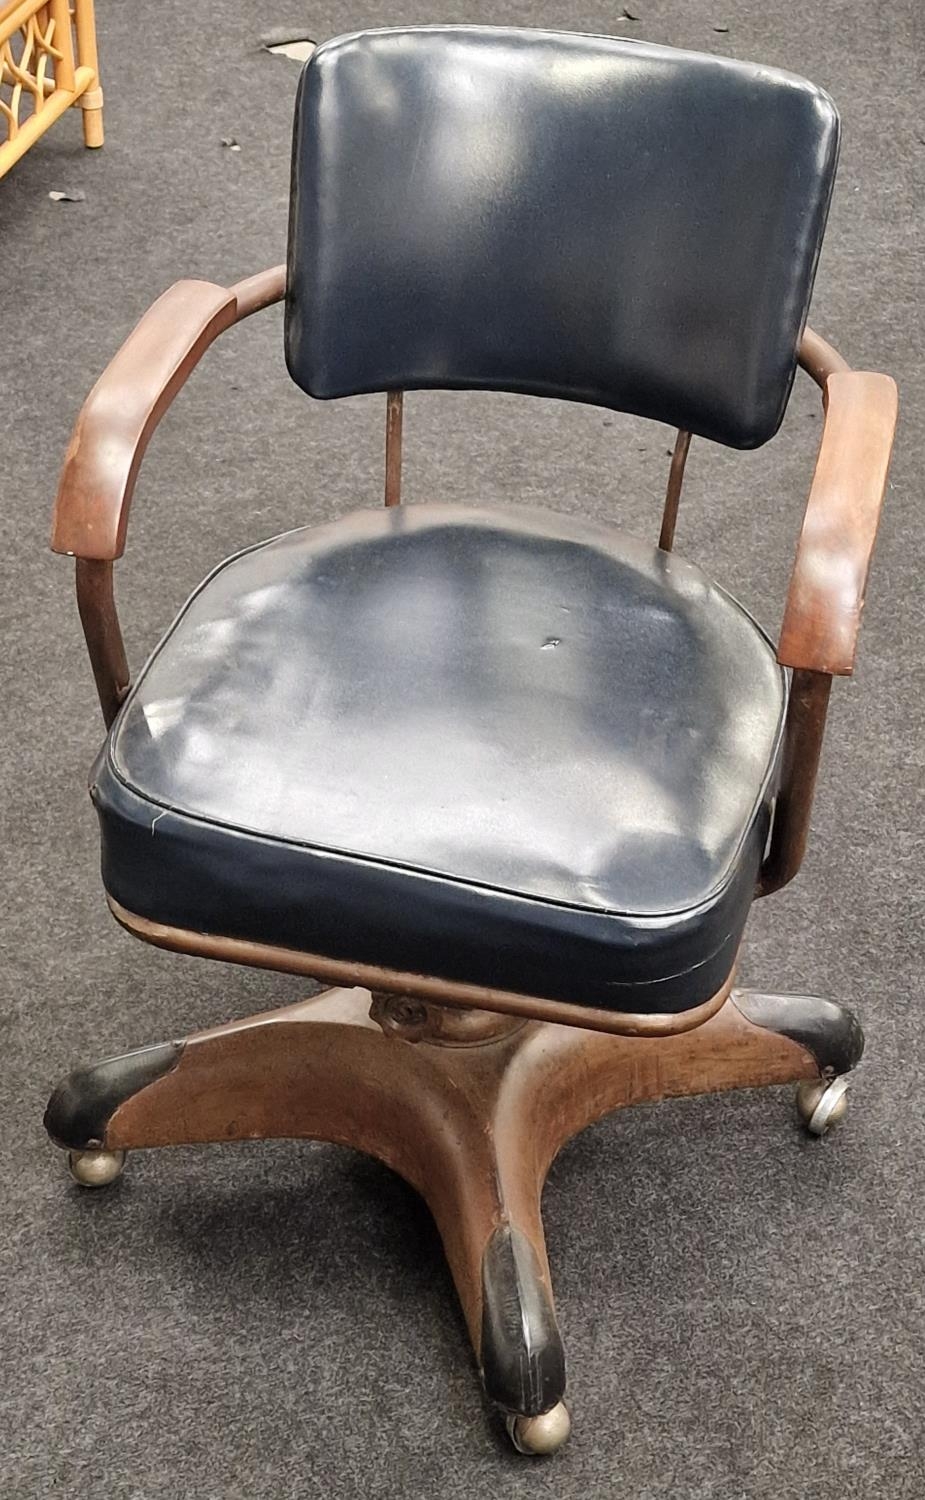 Revolving mid century office chair with cast metal base and casters, set on wooden arm rests